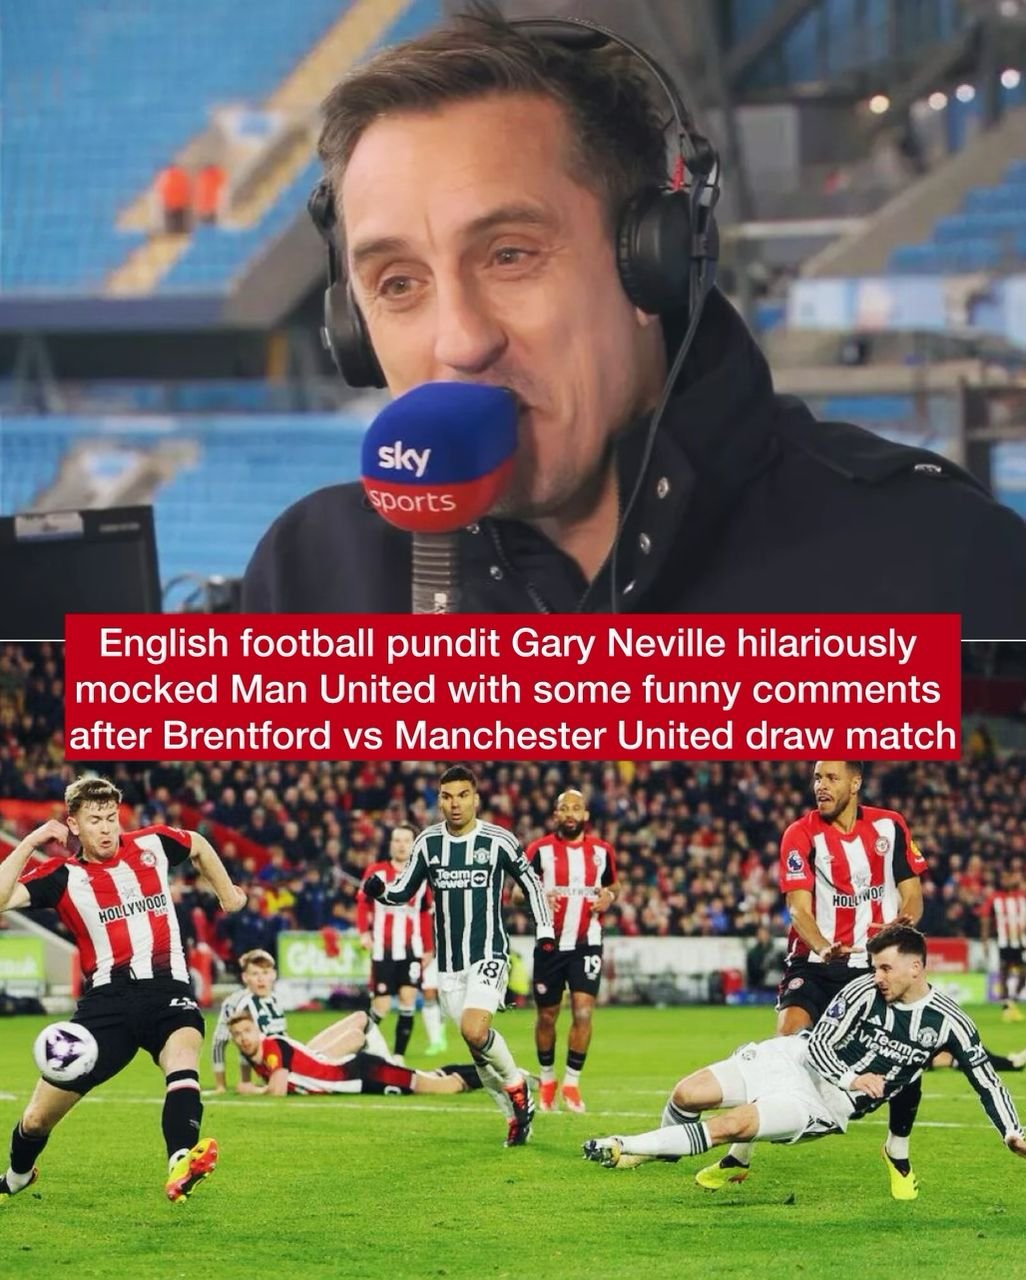 English football pundit Gary Neville hilariously mocked Man United with some funny comments after Brentford vs Manchester United draw match